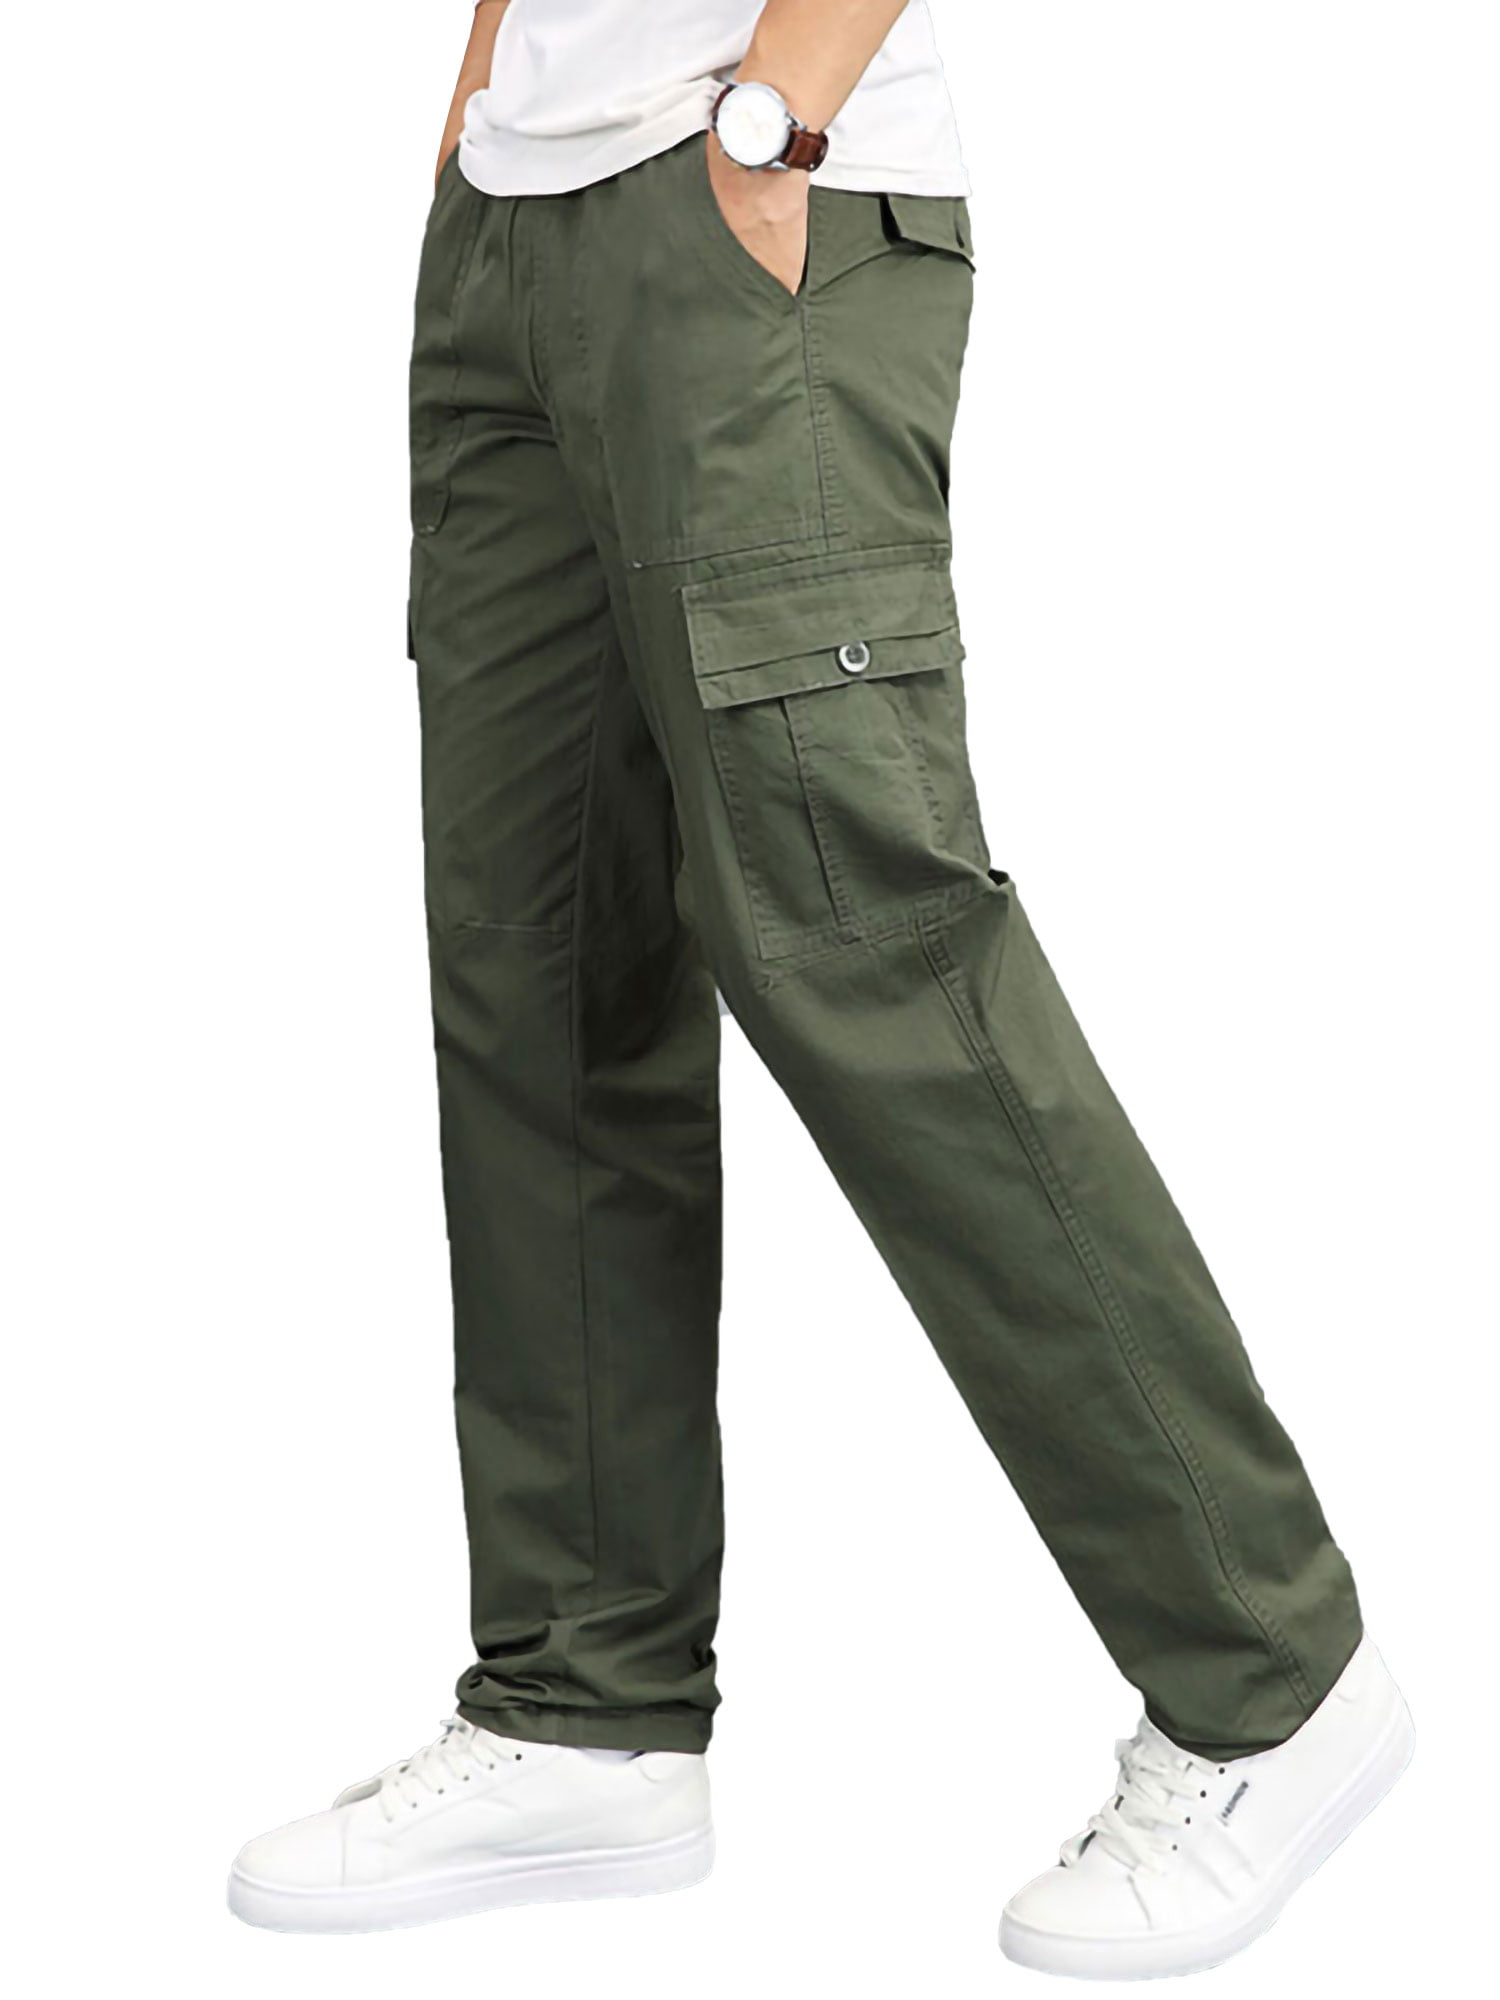 Tactical Men's Trousers Straight Fit Leg Work Cargo Combat Hiking Outdoor Pants 